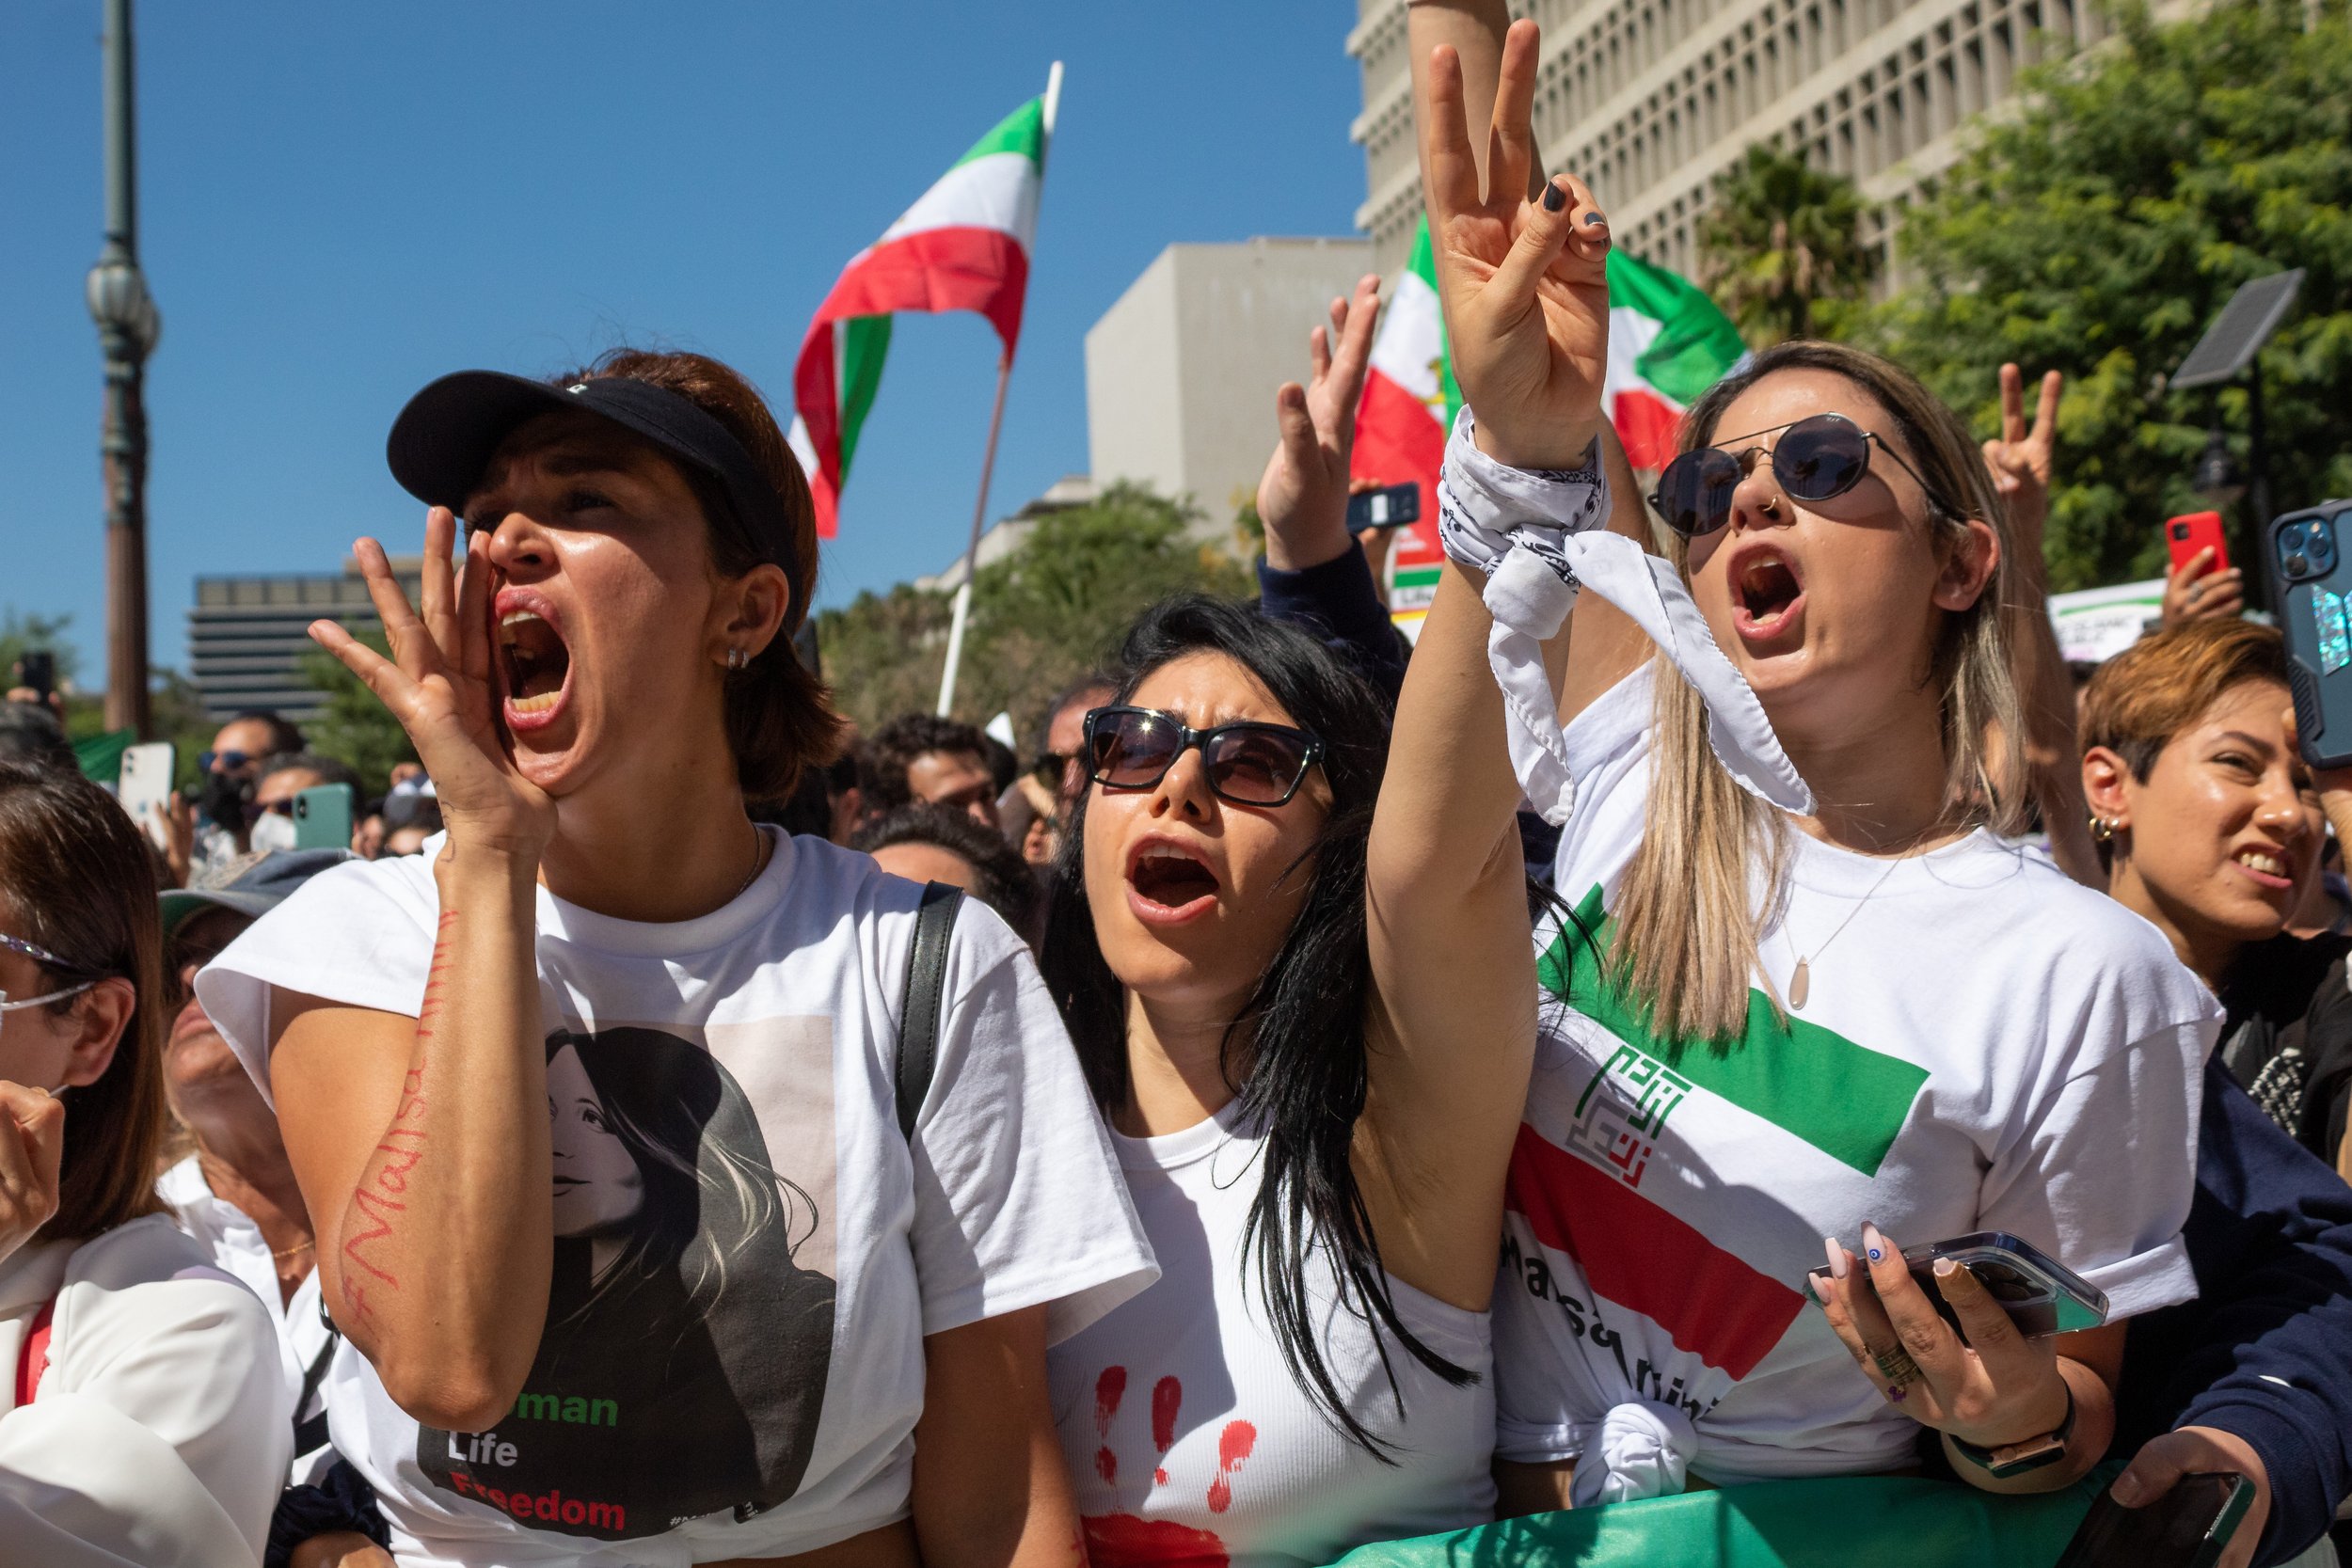  Maryam Mohebfar (left), Ashley (middle), and Diba (right) cheering at the Freedom for Iran rally on the steps of Los Angeles City Hall. The rally marched from Pershing Square with at least a thousand people in attendance as well as being part of a l